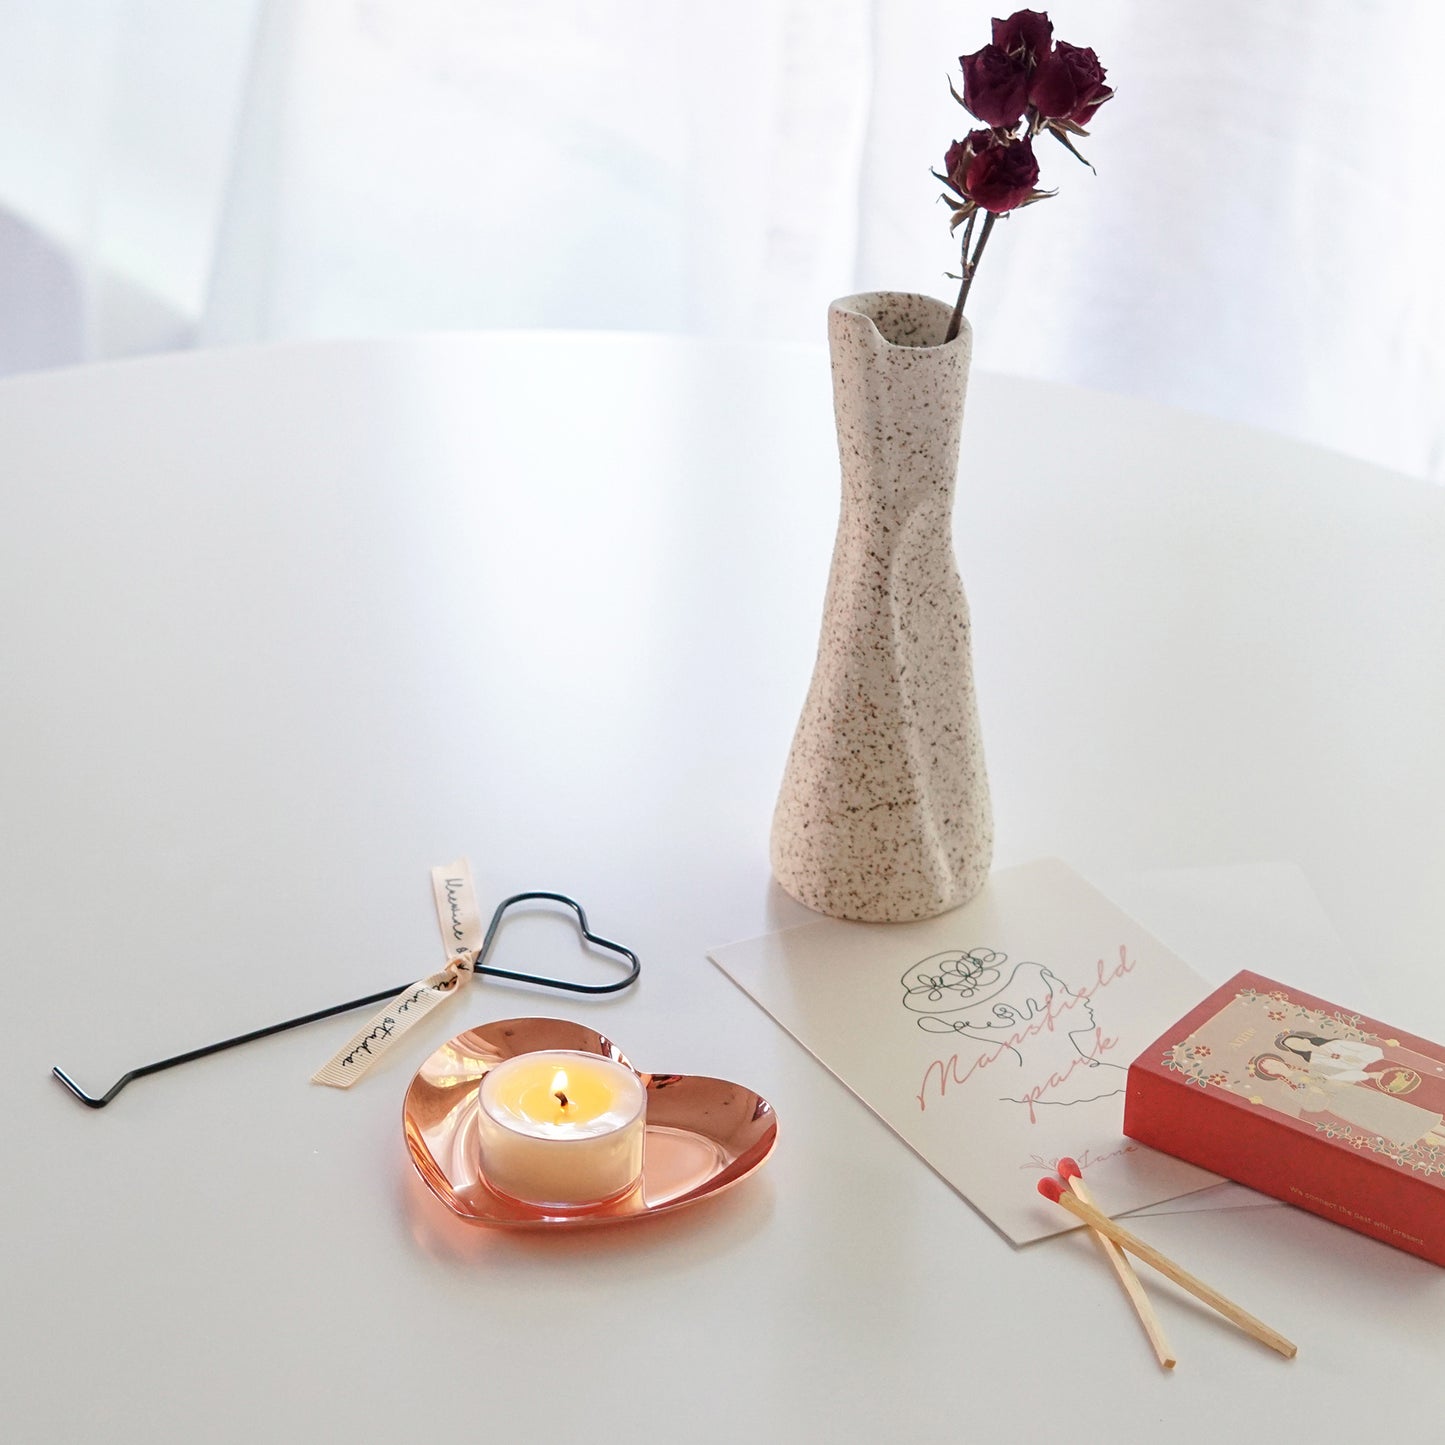 a lit tealight candle on rose gold heart tray, heart wick dipper, red matches, one line drawing minimal postcard, and burgundy dried roses in ceramic unique vase on white round table